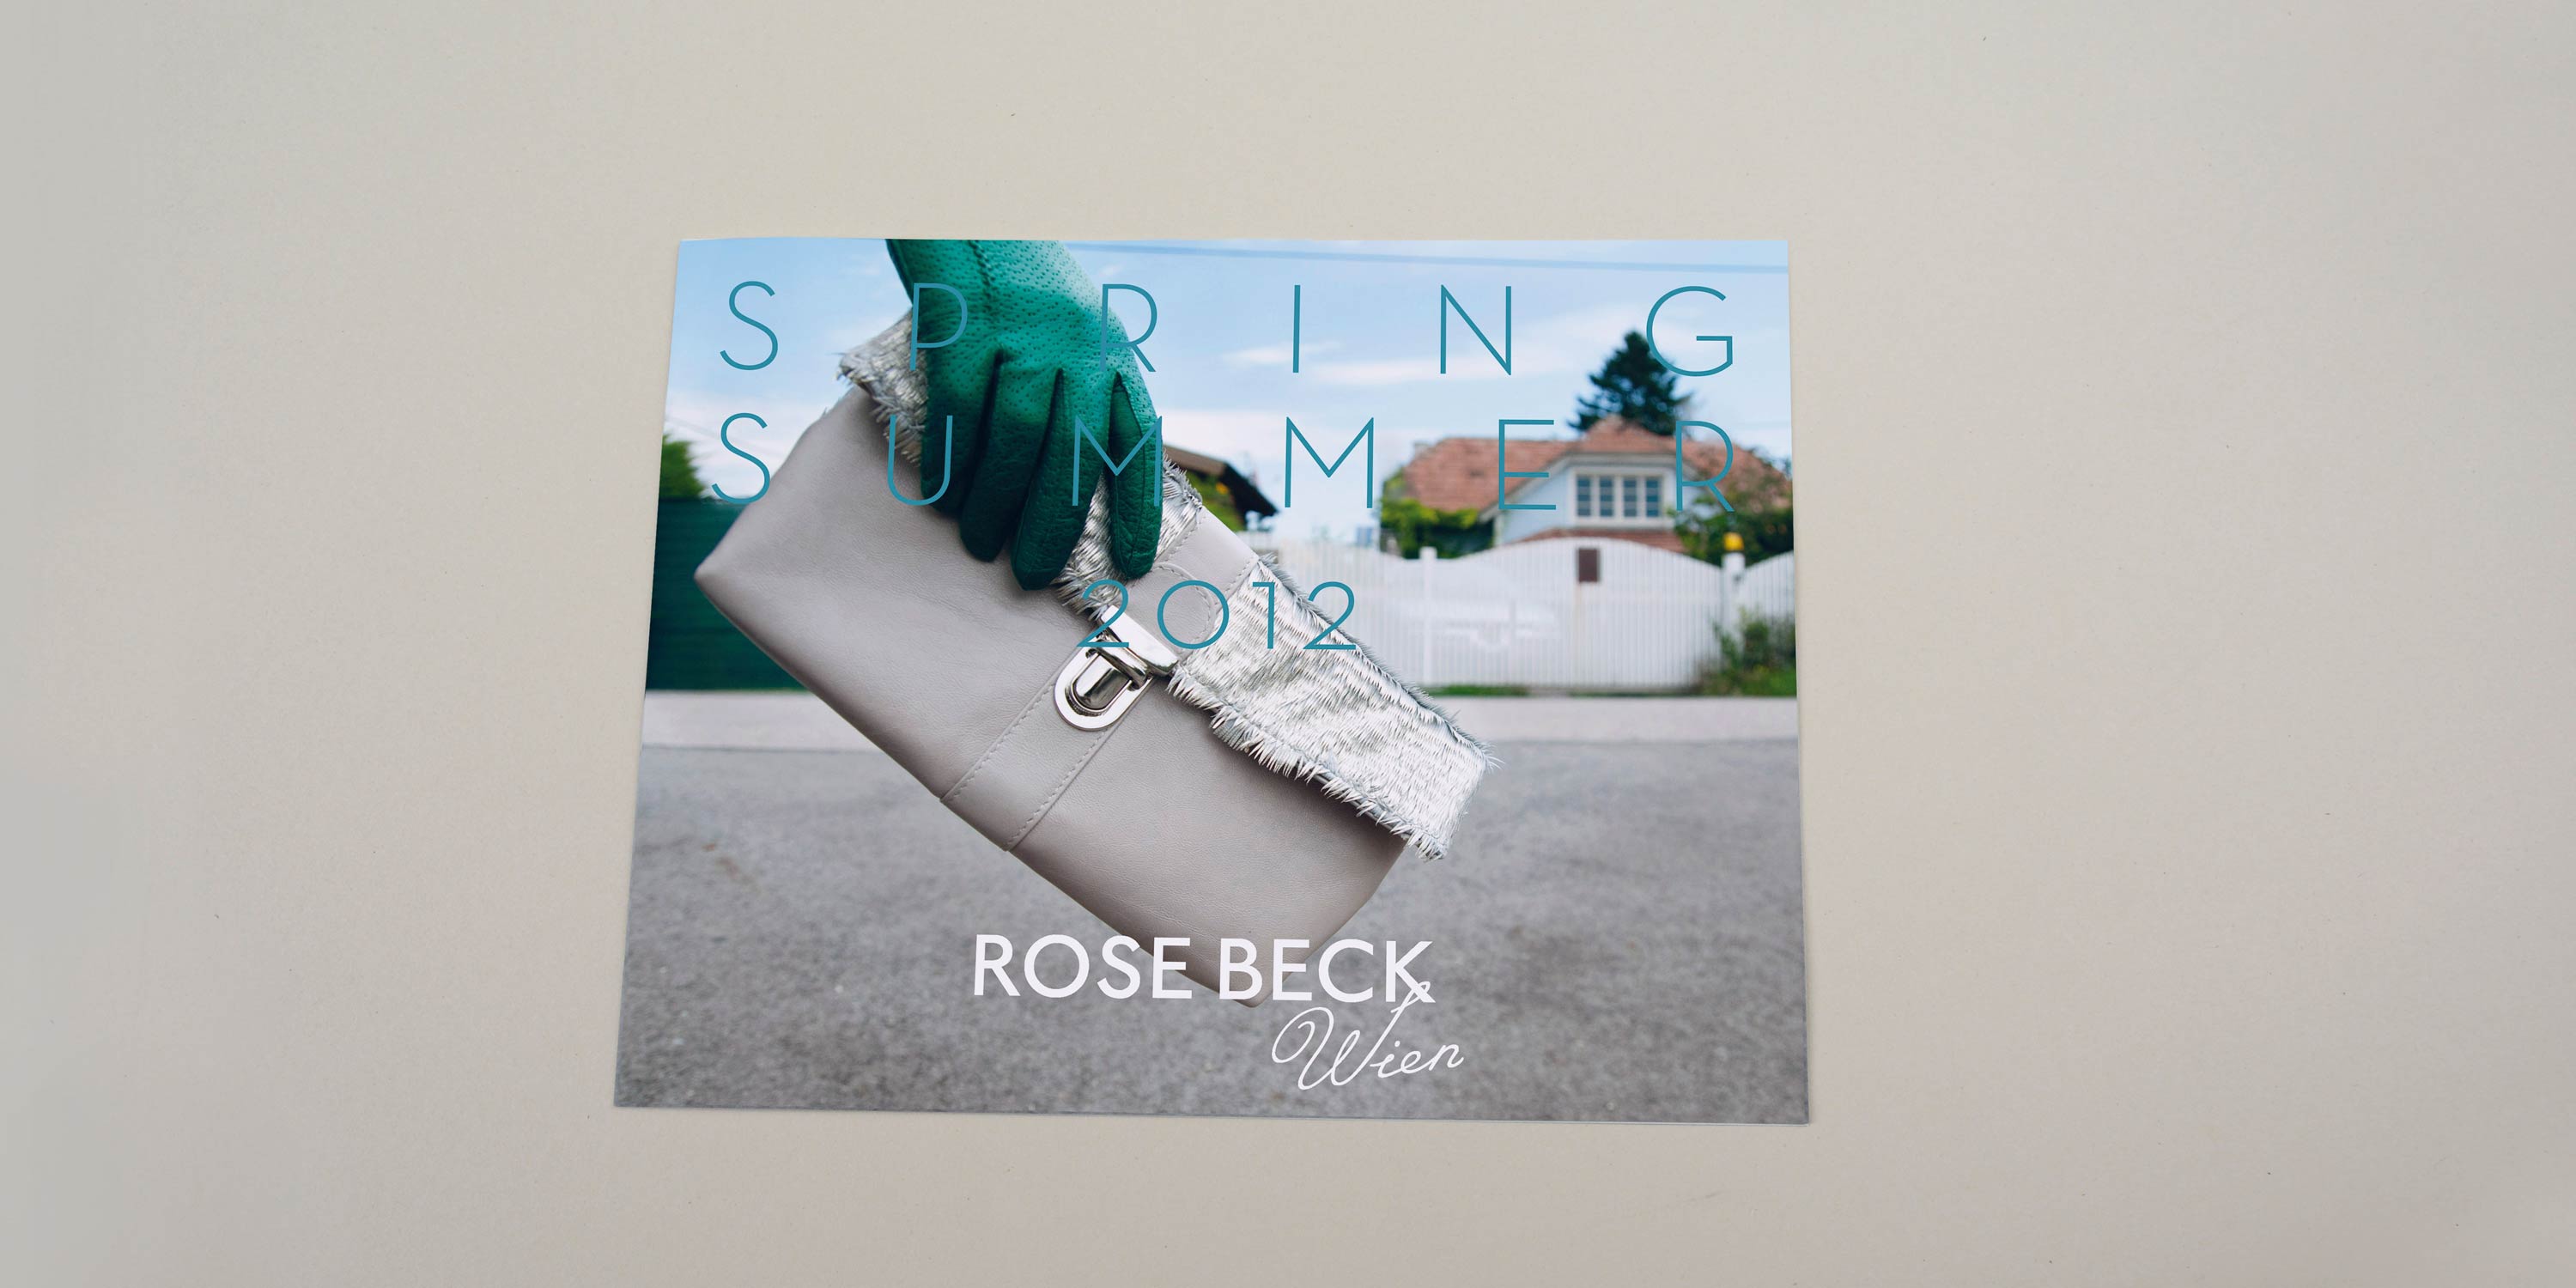 Cover catalogue. Close-up of hand holding handbag. Fence and houses in the background. Large title font  with lots of spacing overlayed. Logo at bottom overlayed.